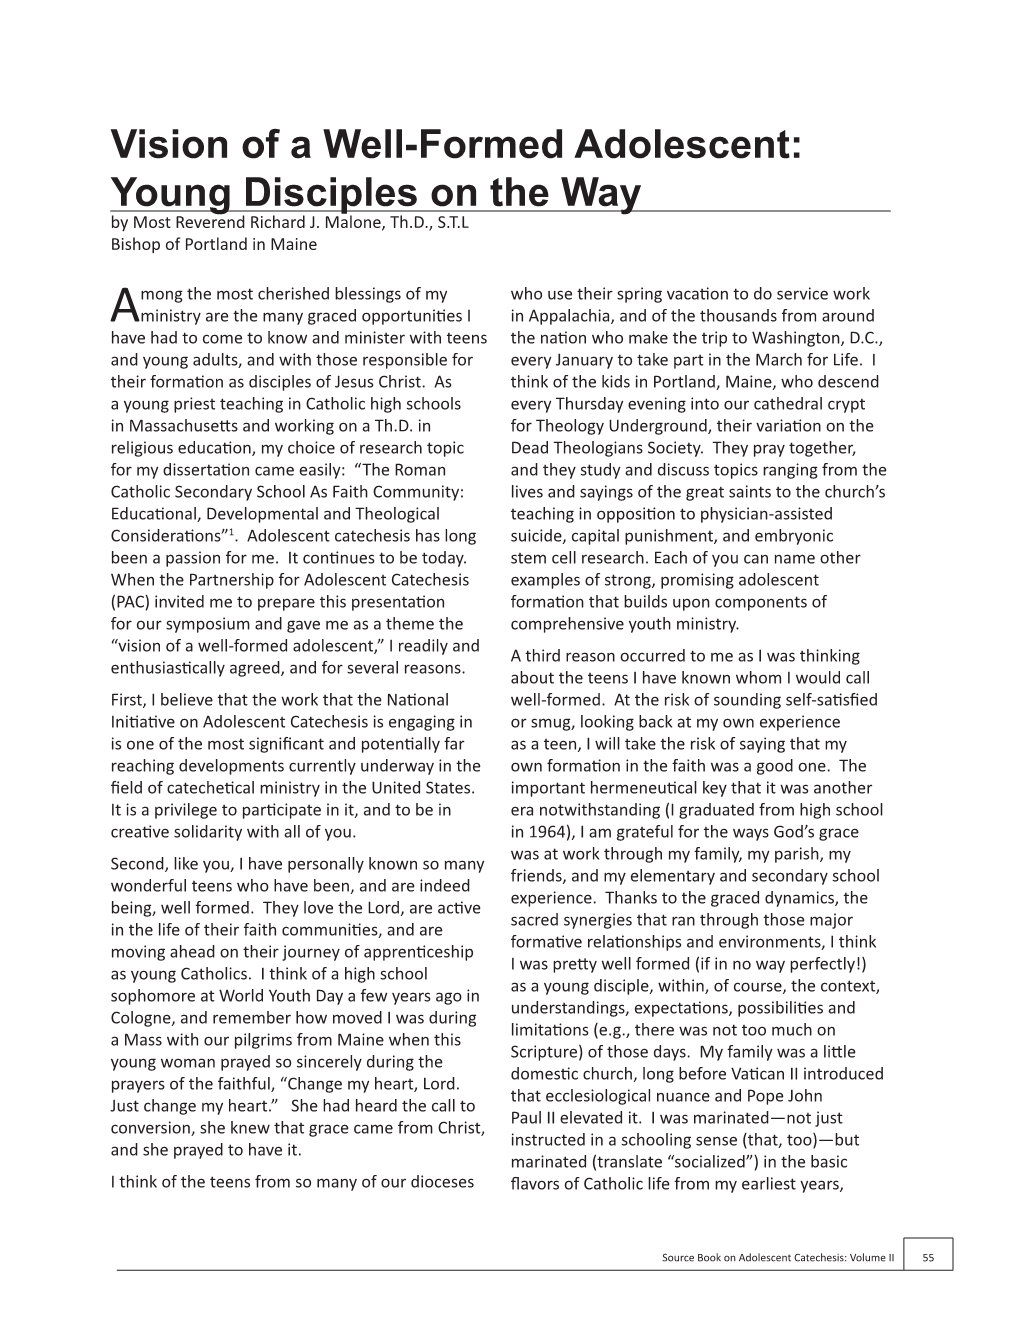 Vision of a Well-Formed Adolescent: Young Disciples on the Way by Most Reverend Richard J